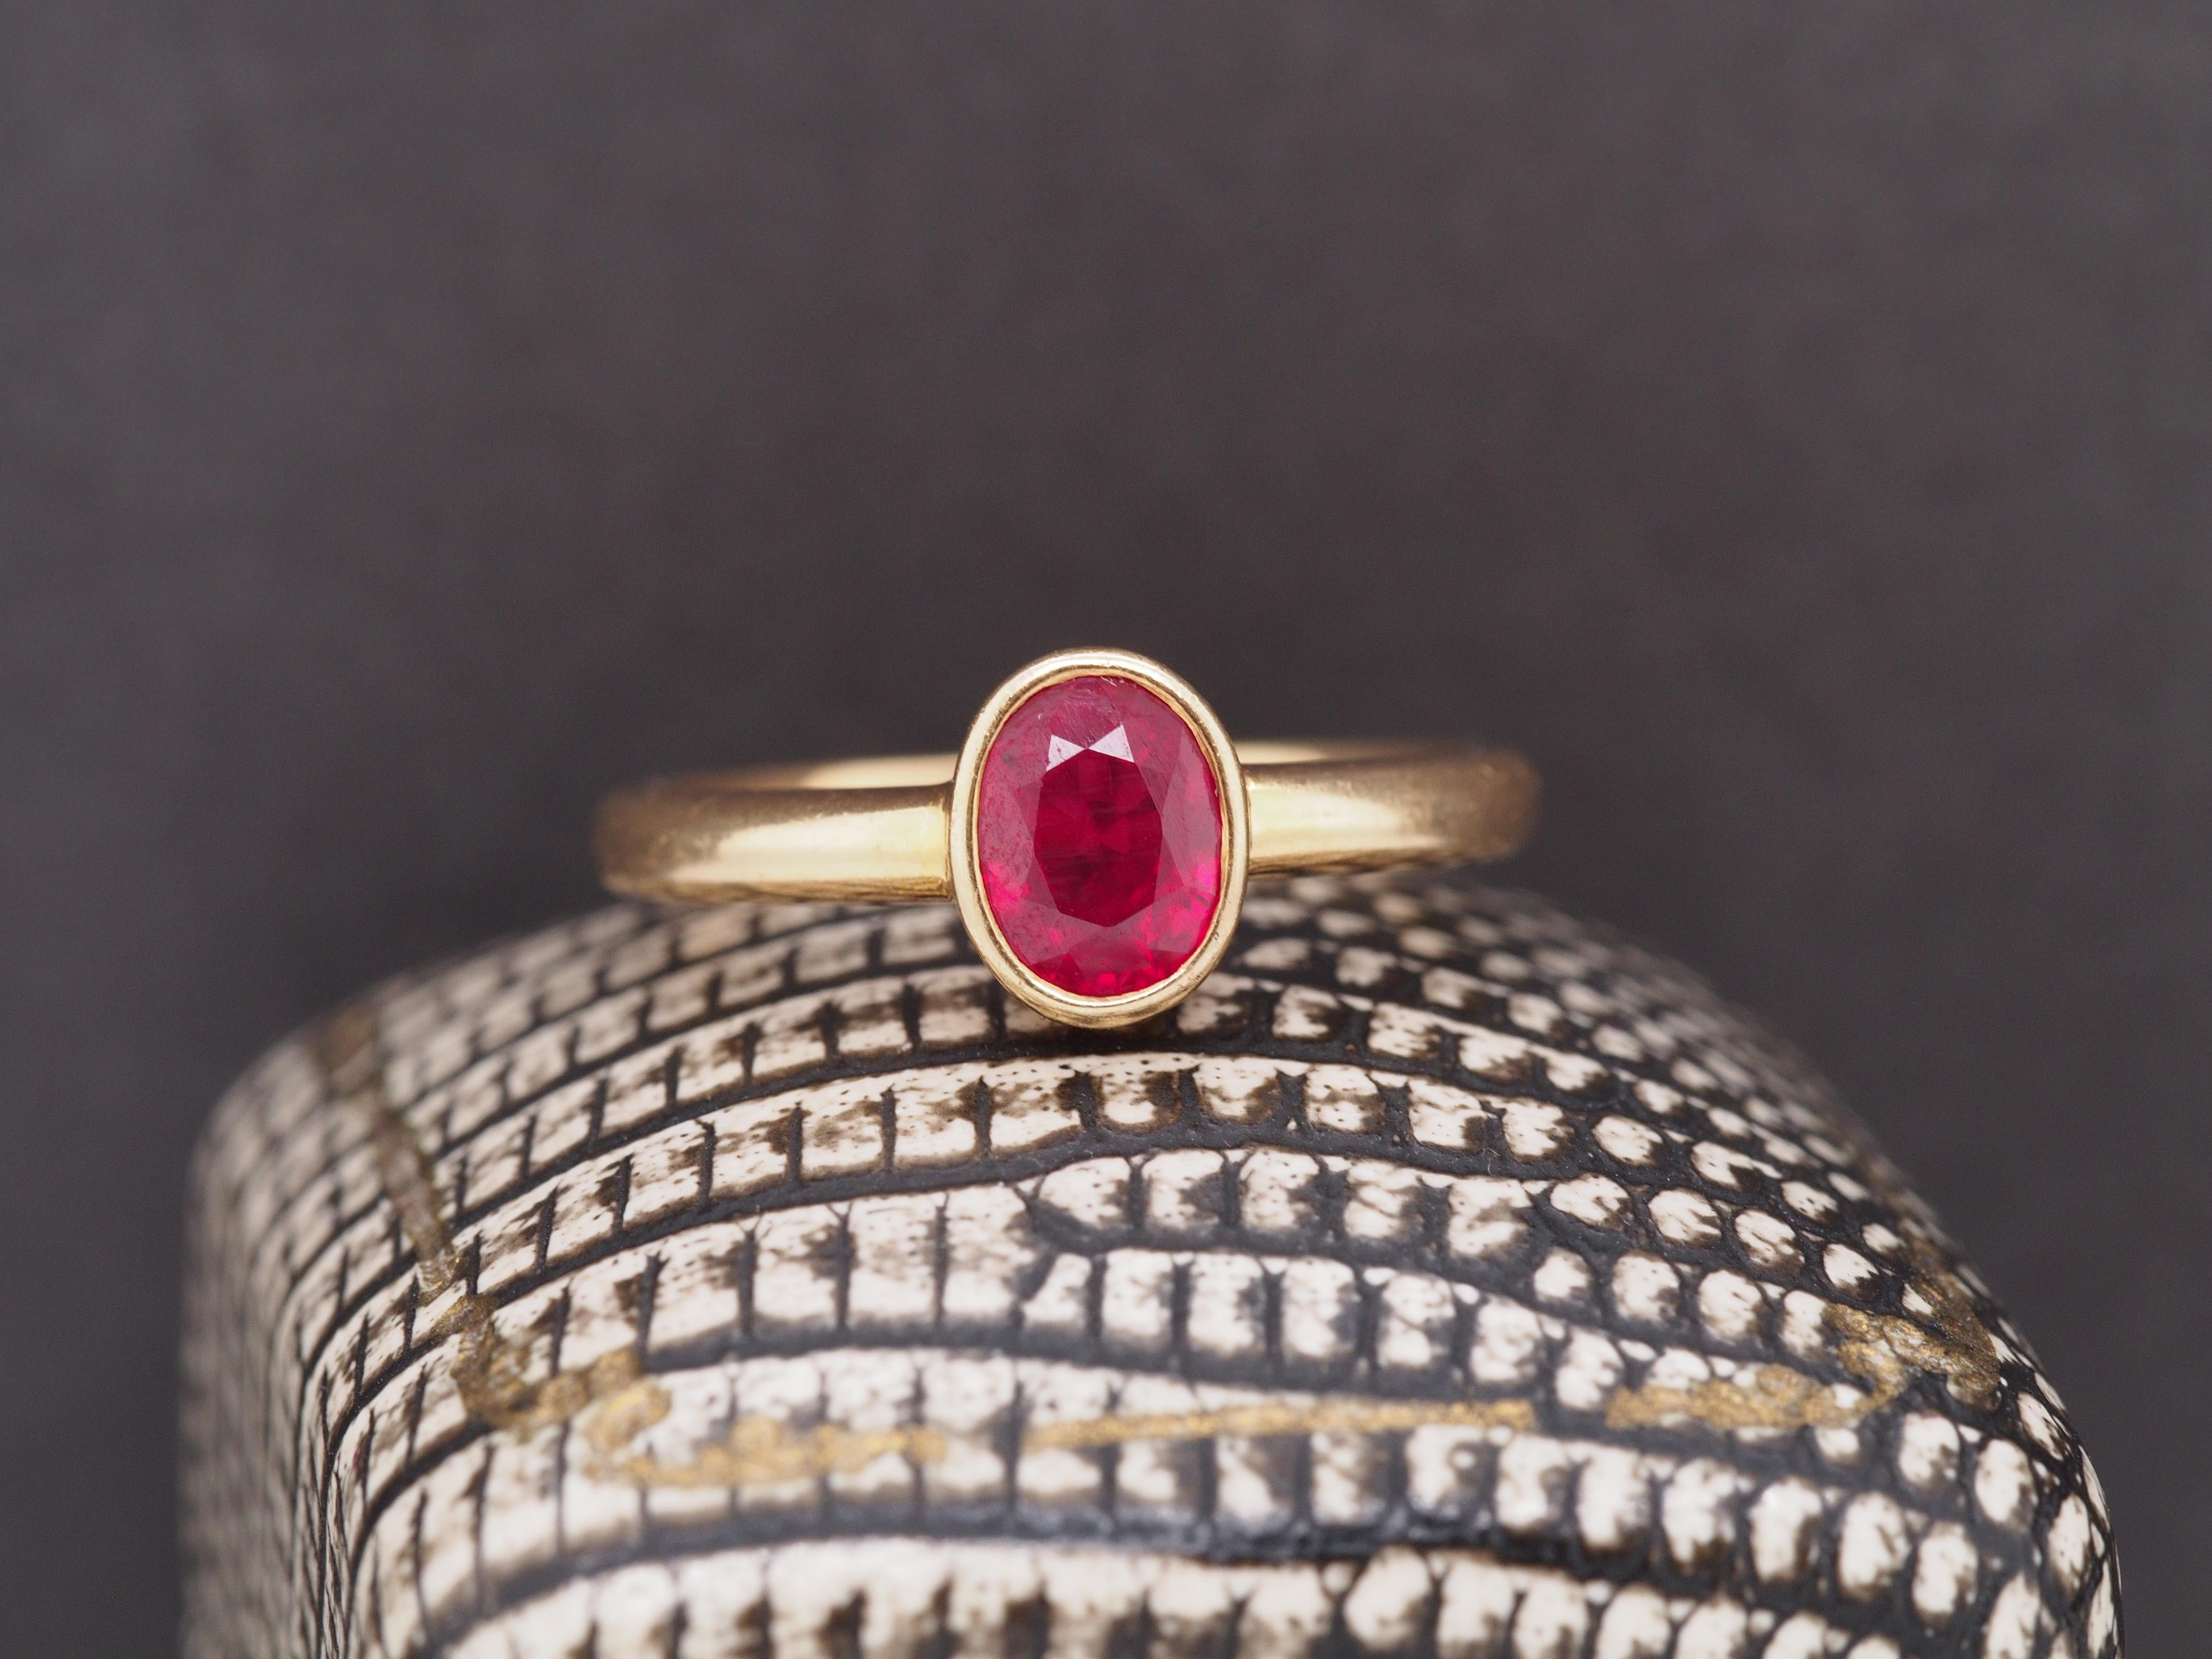 Year: 1950s
Item Details:
Ring Size: 6.5
Metal Type: 18K Yellow Gold [Hallmarked, and Tested]
Weight: 3.7 grams
Ruby Details:
GIA Report number: 7235084065
Color: VIVID RED, PIGEON BLOOD (Highest grade of color a ruby can receive)
Natural